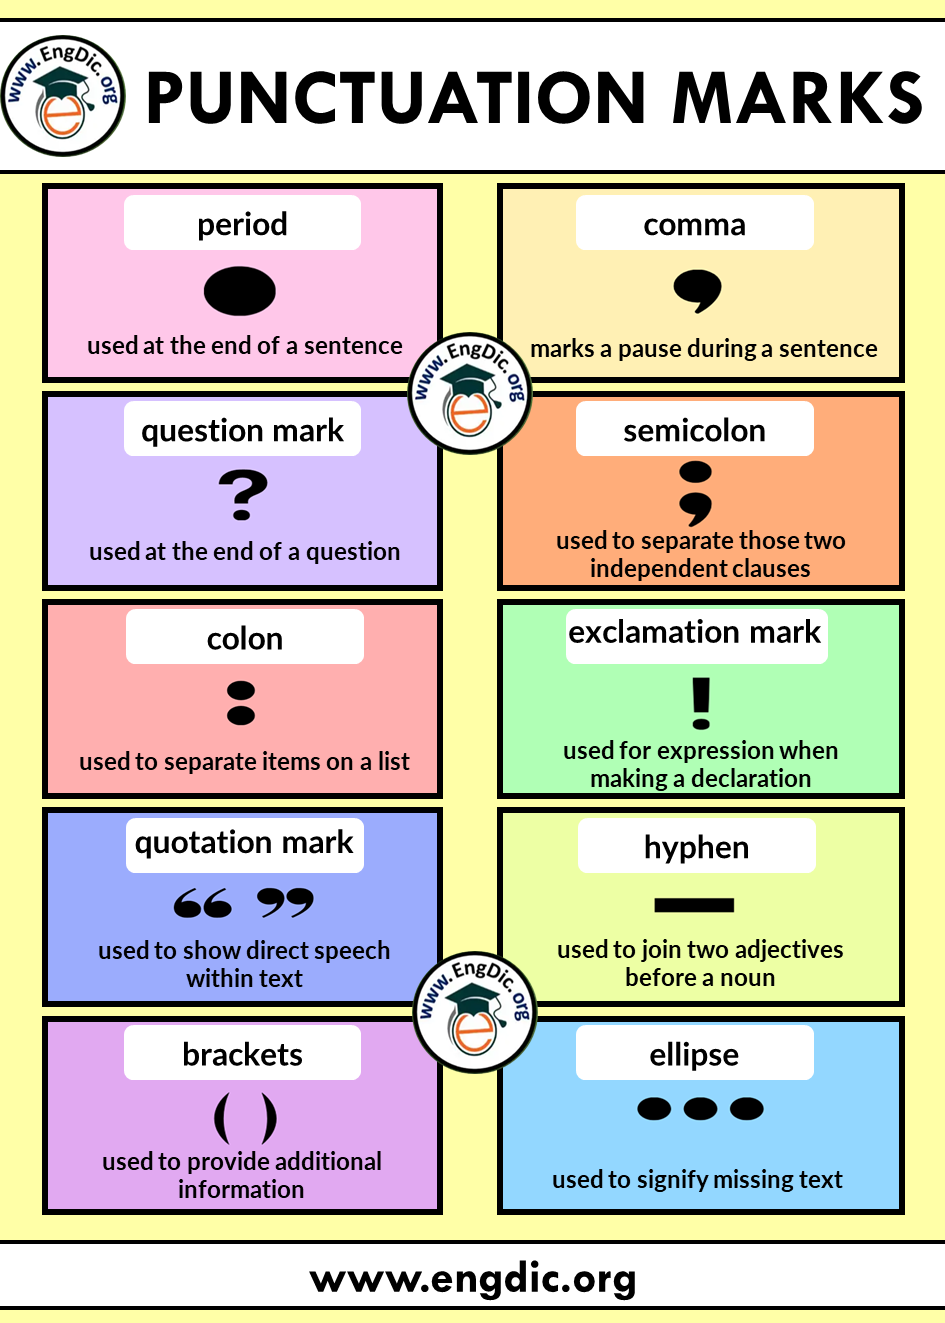 what are the punctuation marks and their uses